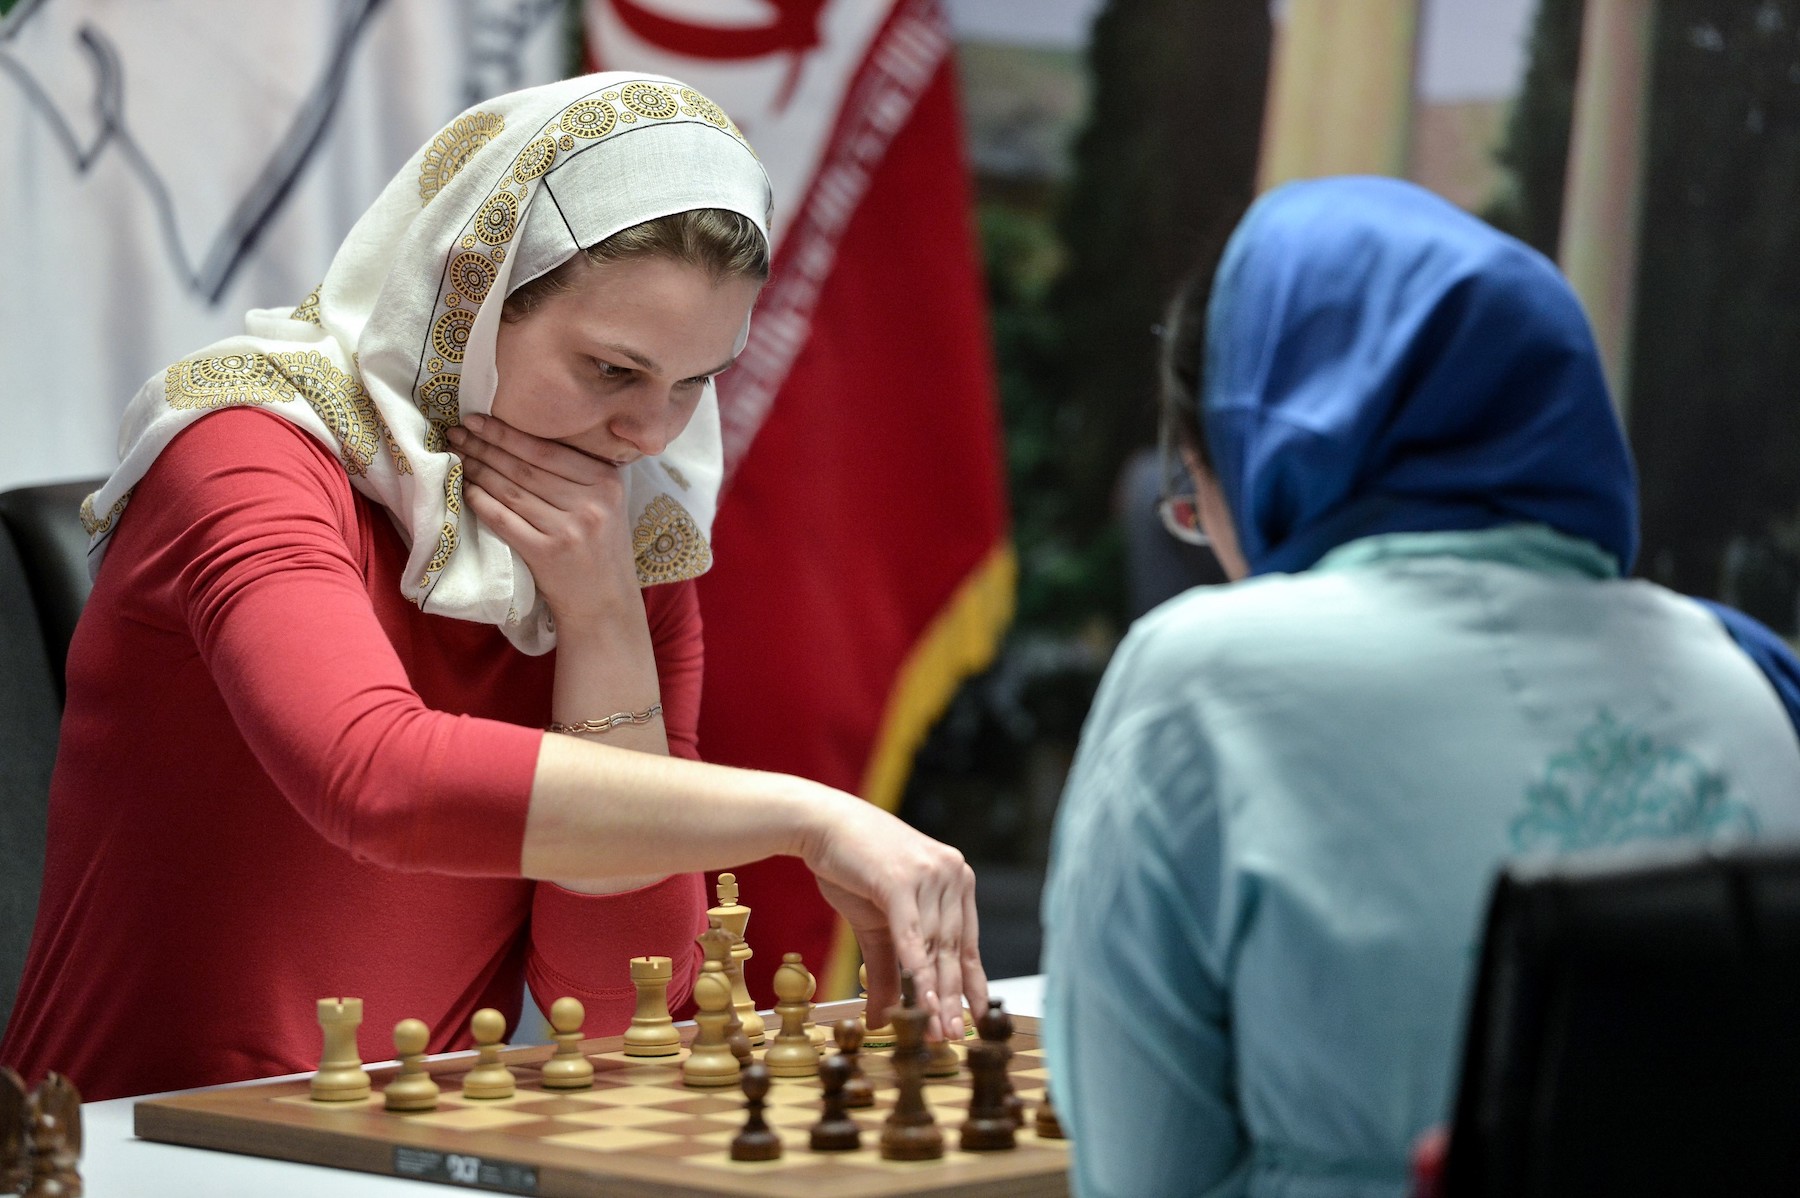 Two chess players playing against each other